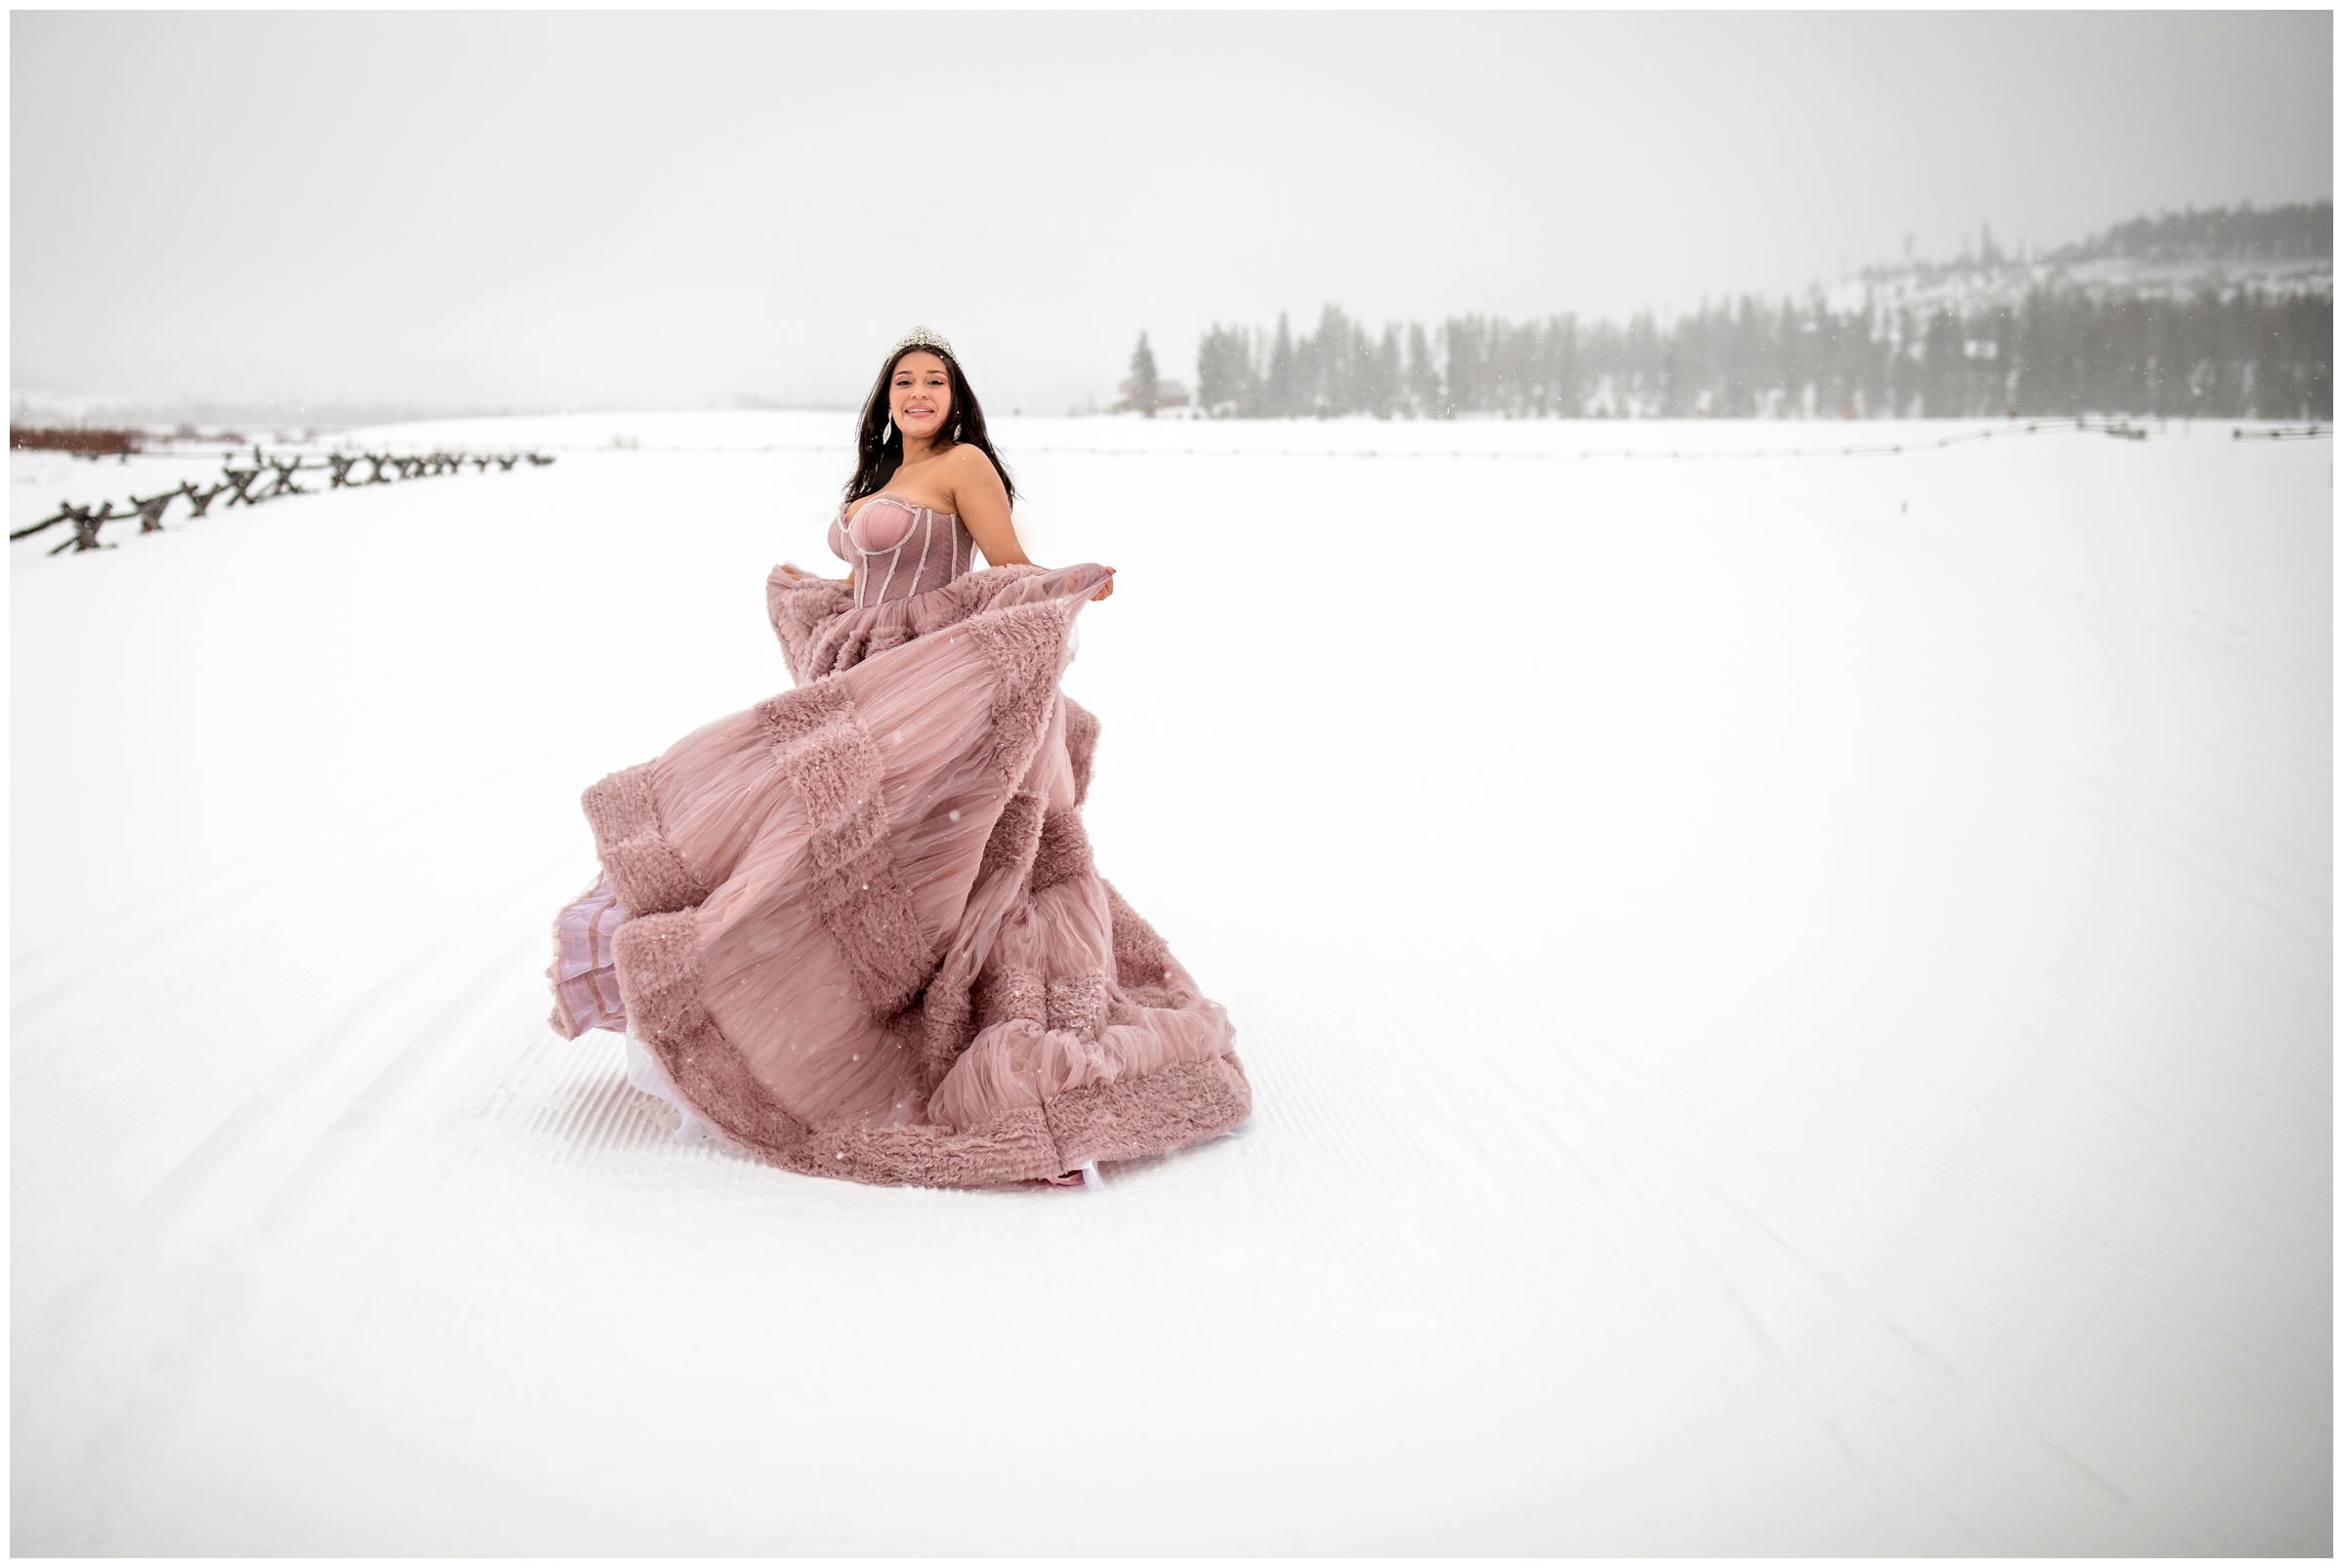 Snowy Colorado quinceañera photoshoot at Devil's Thumb Ranch by Winter Park photographer Plum Pretty Photography